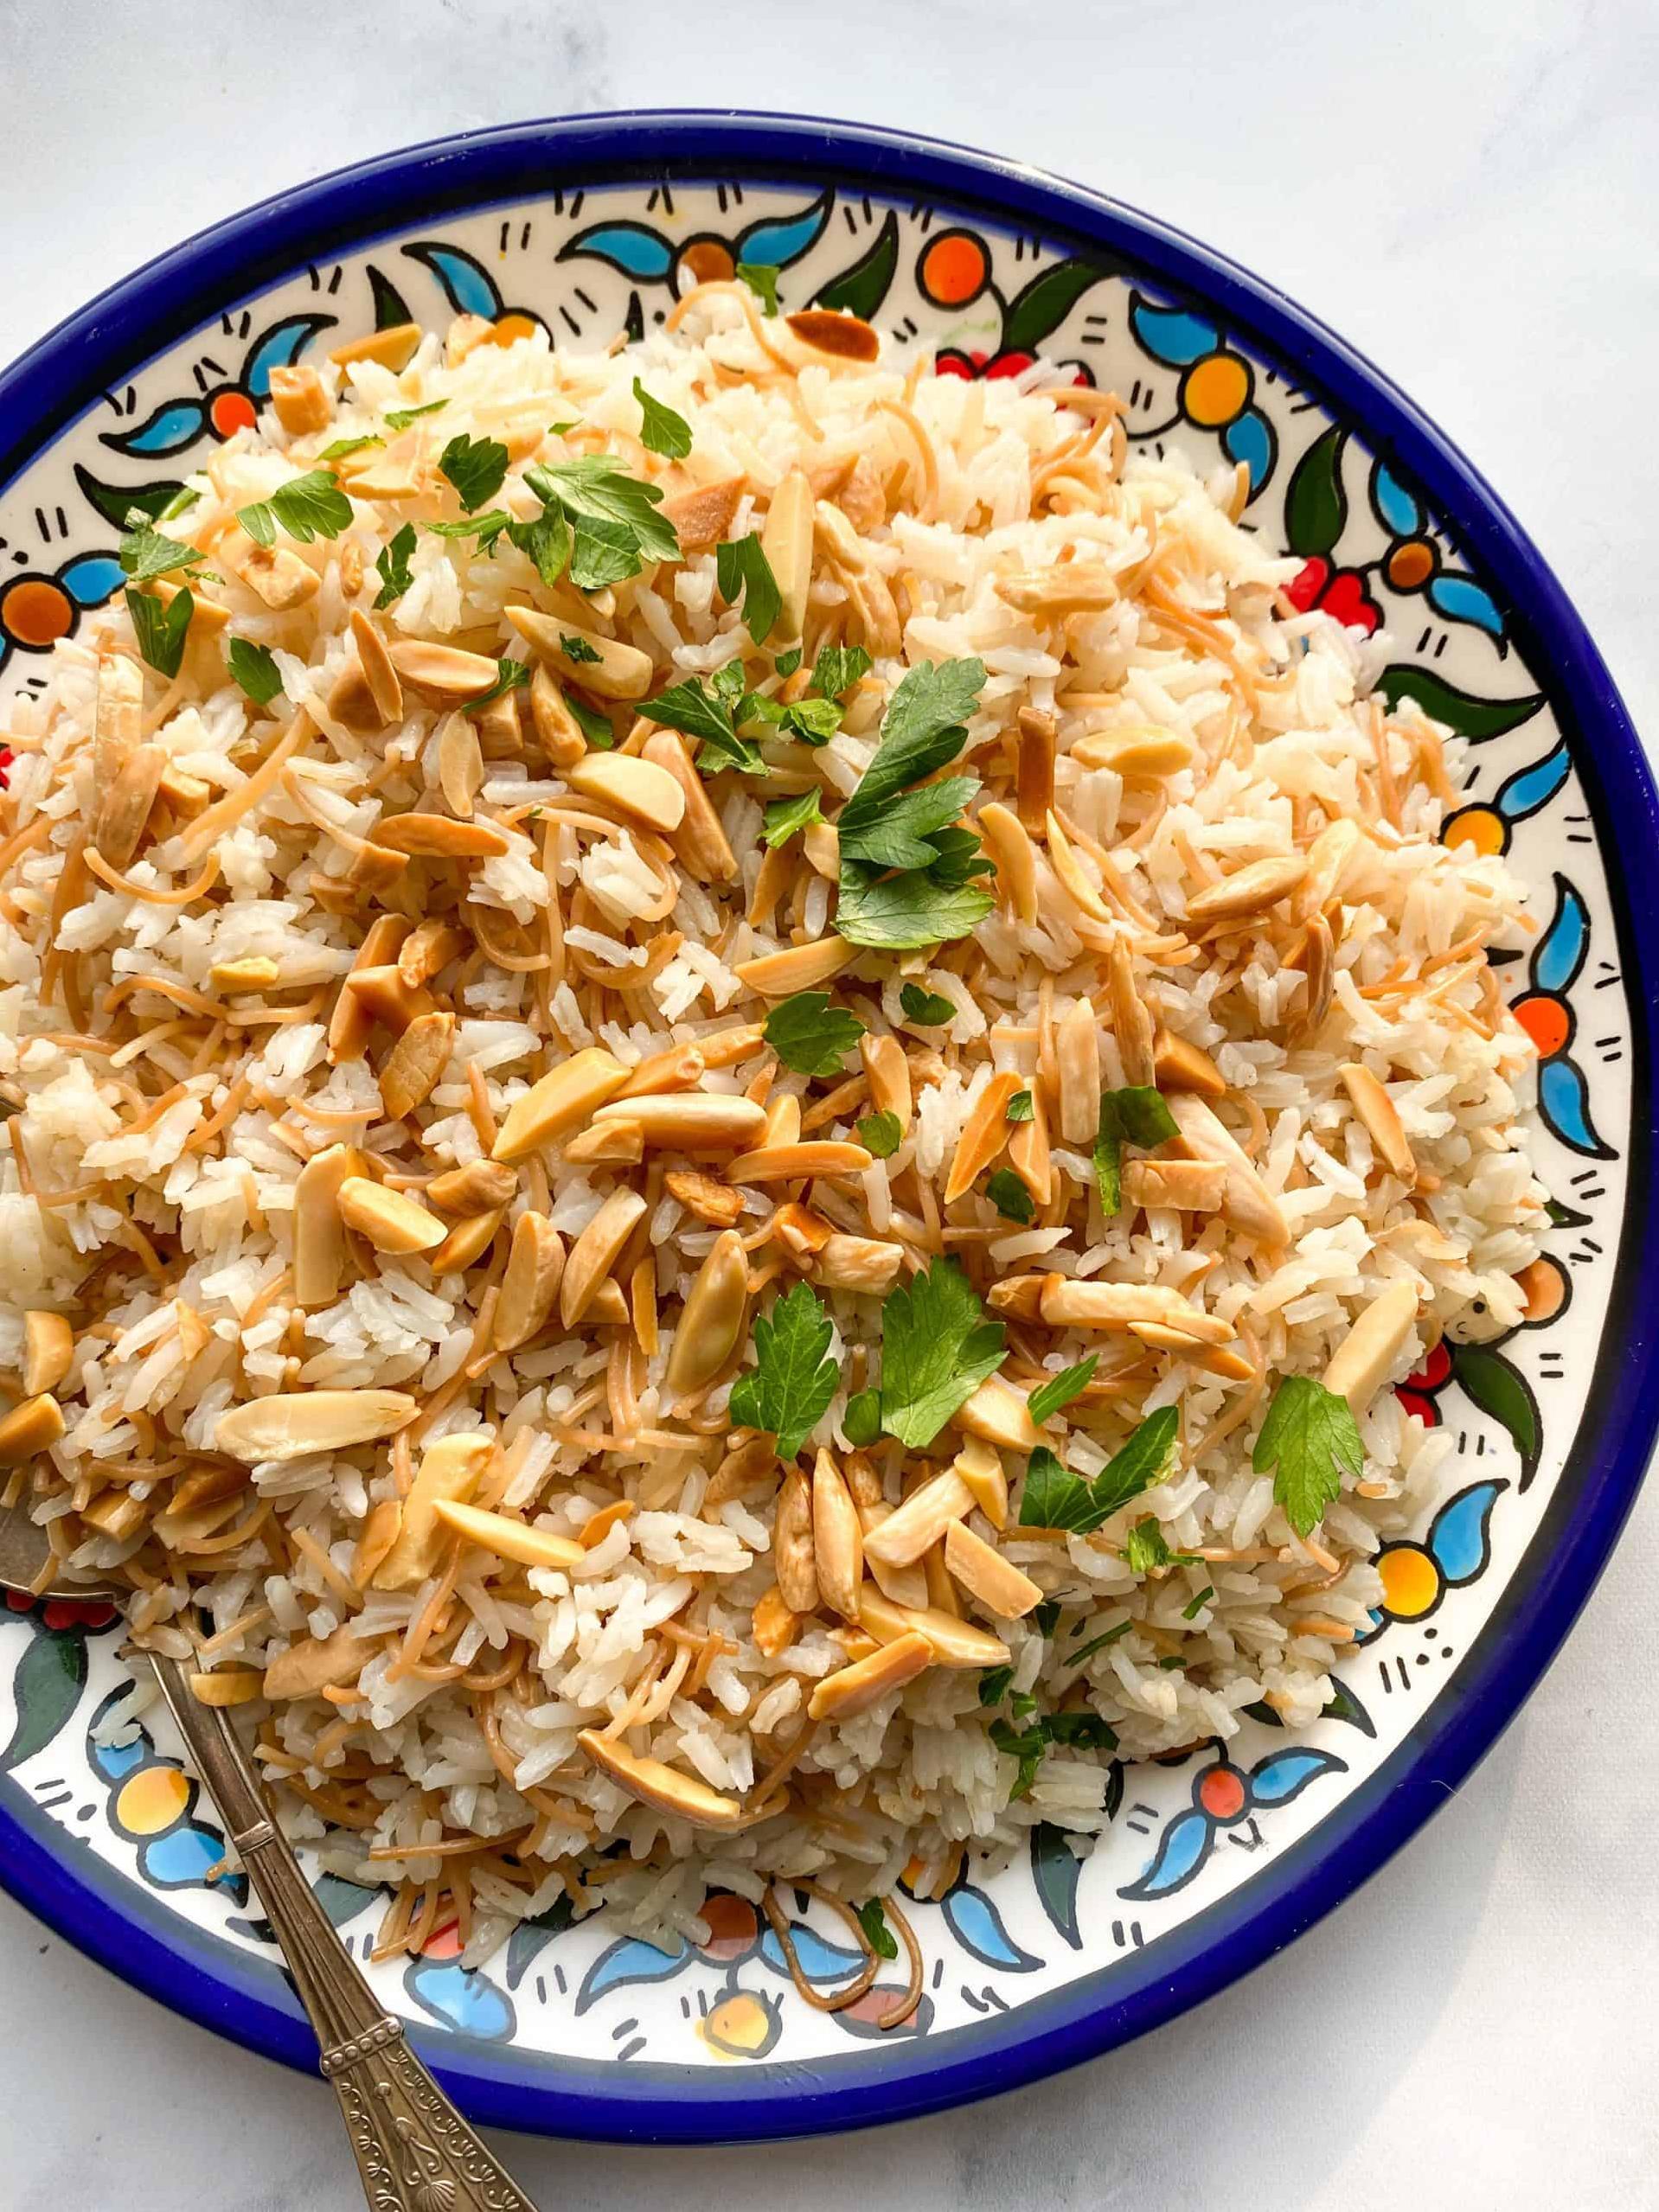  This rice is so good, you will want to lick the pot clean.